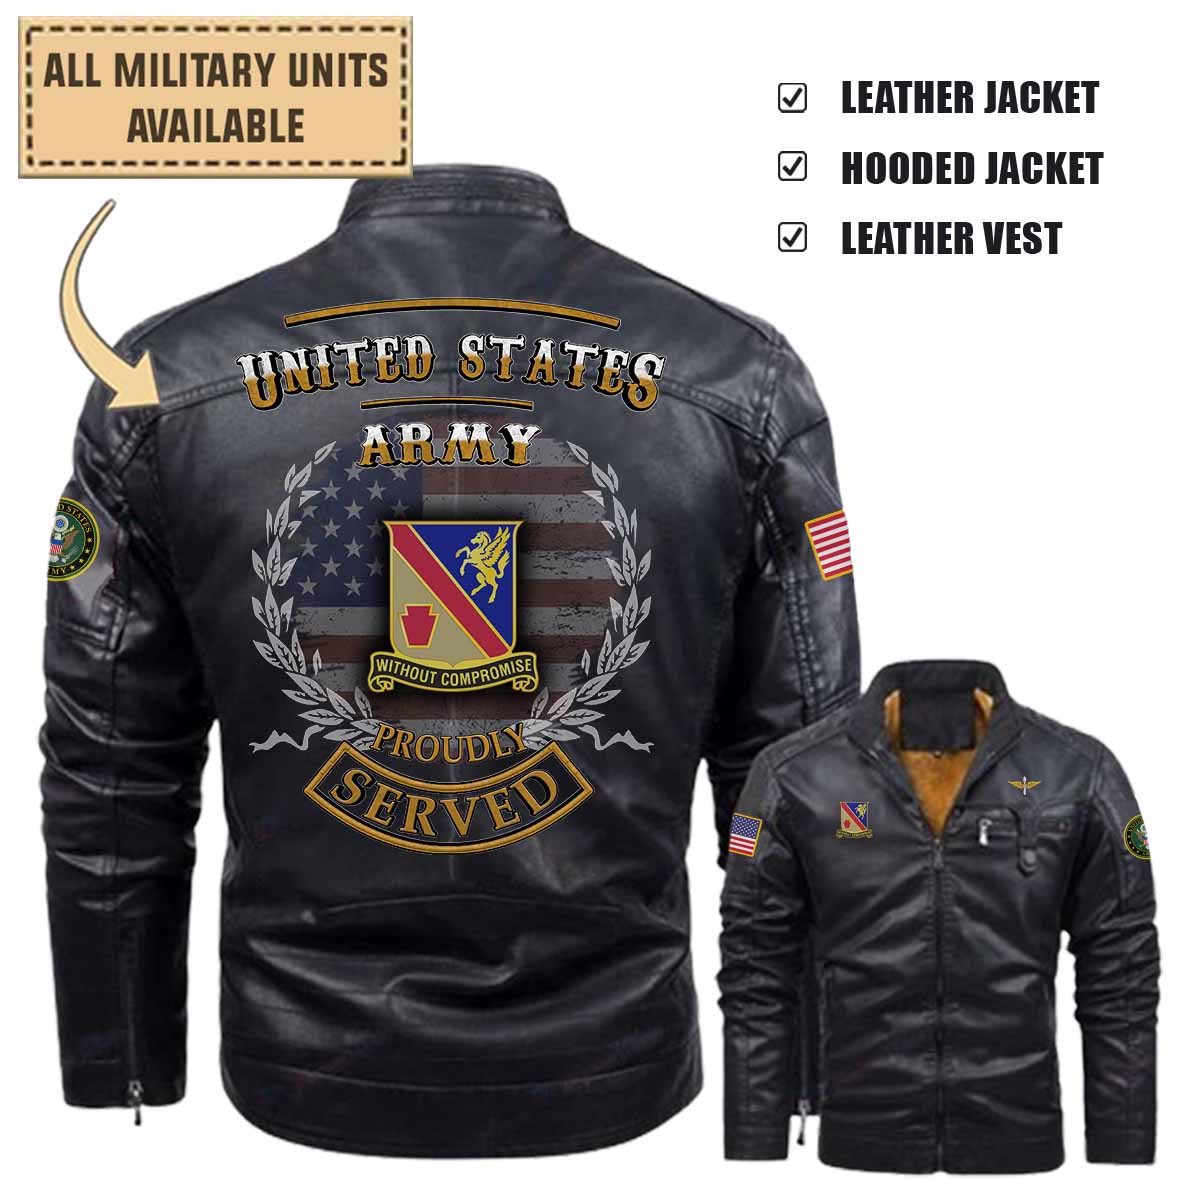 628th asb 628th aviation support battalionleather jacket and vest 0b0bq